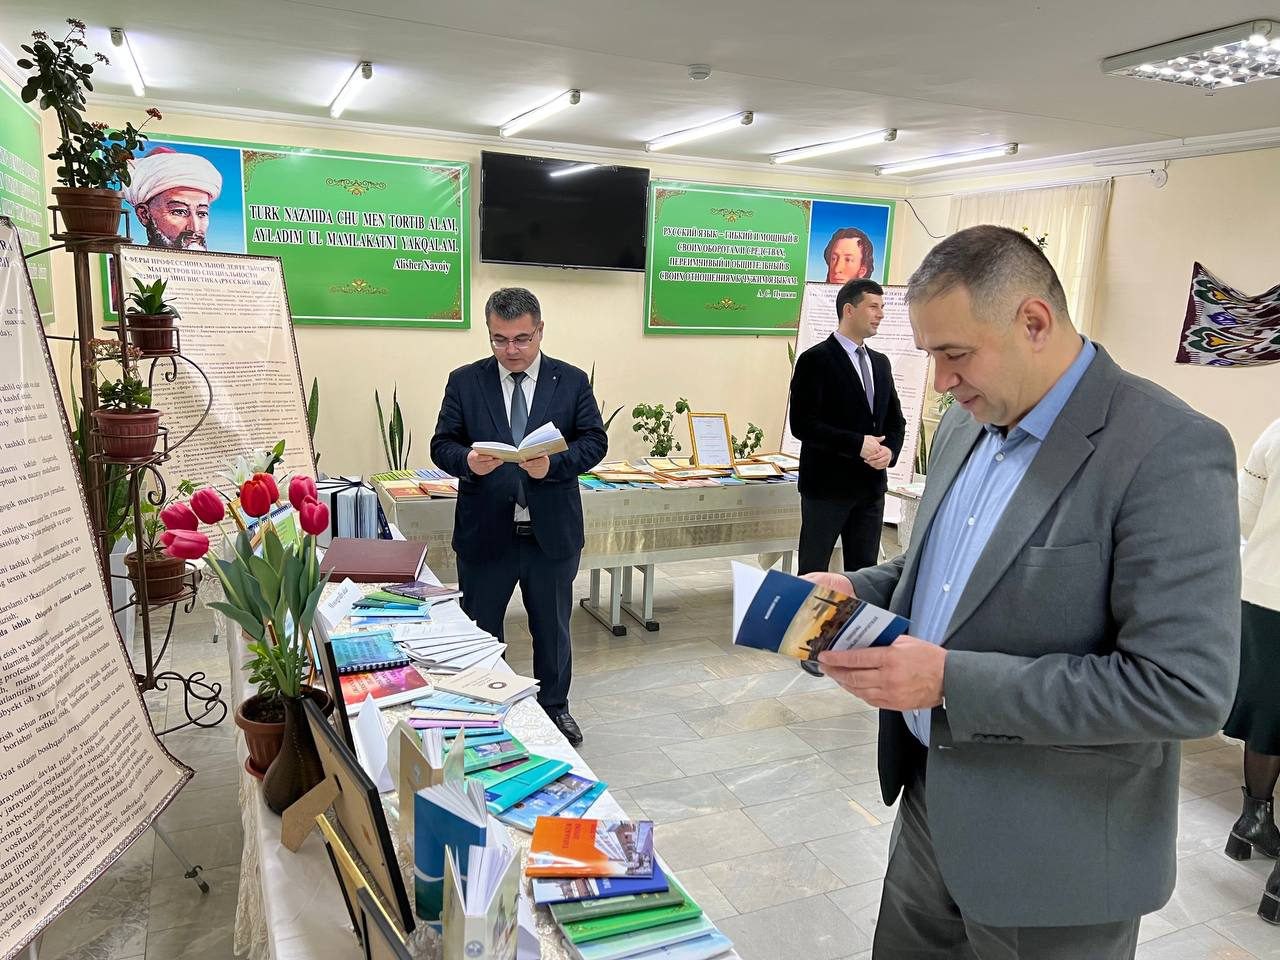 An exhibition of scientific works was held at the Faculty of Philology